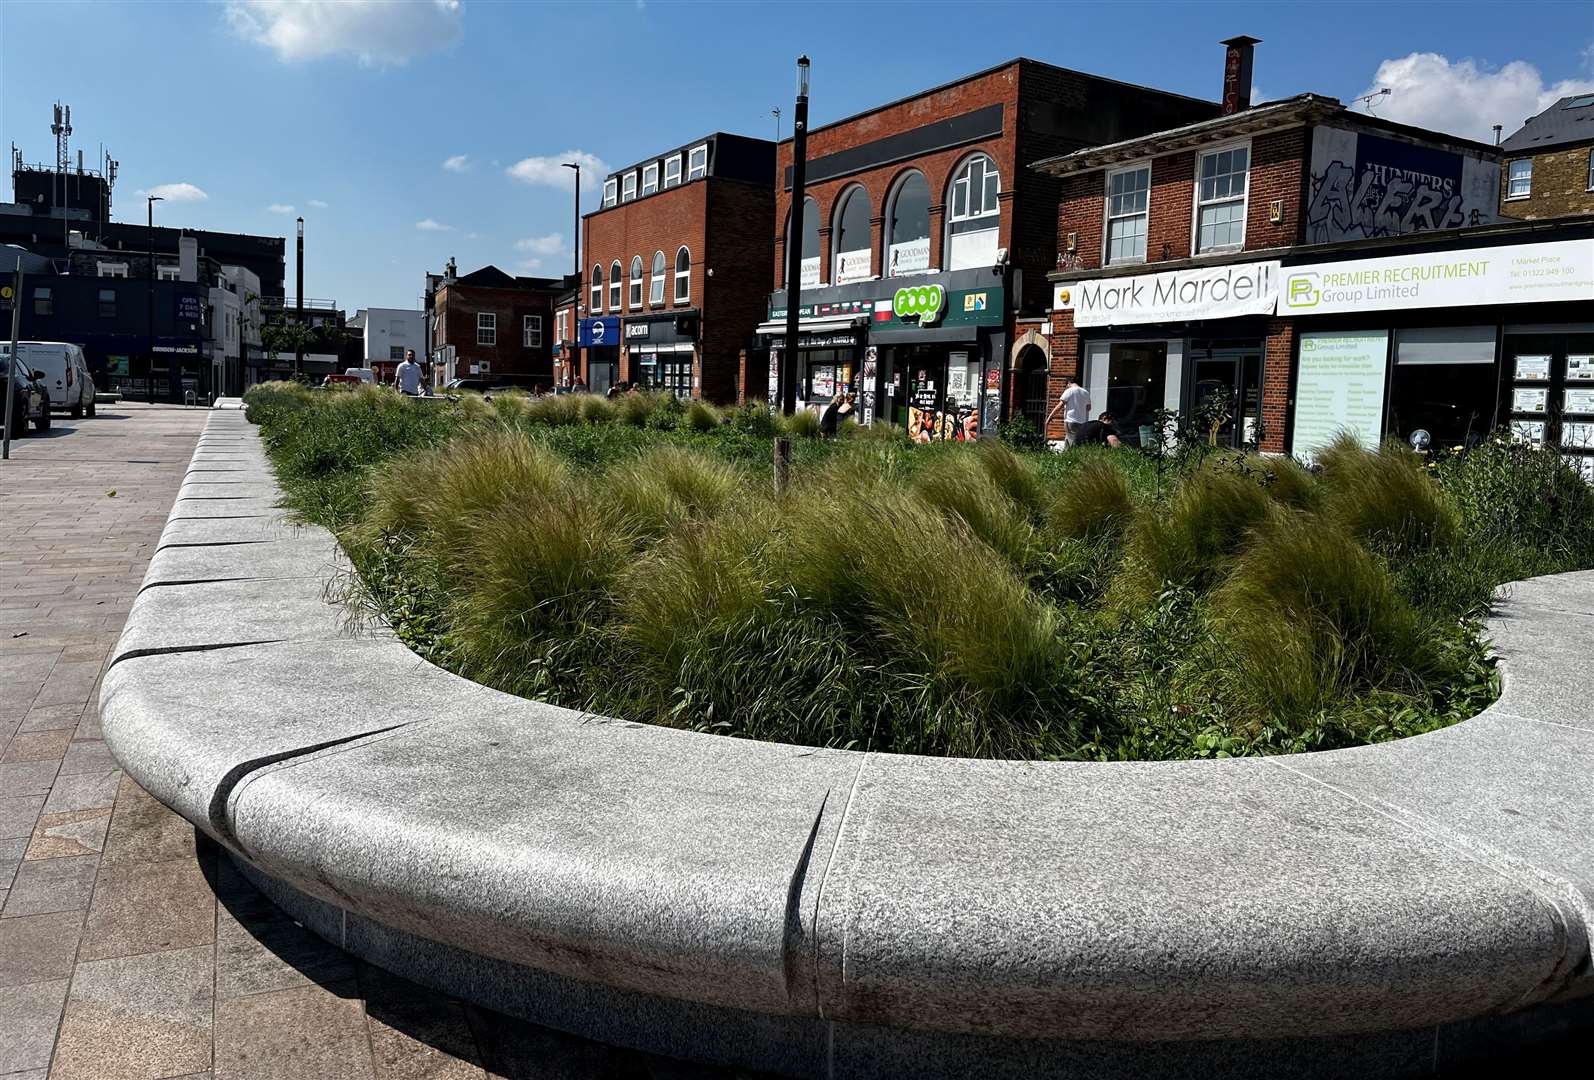 The shrubbery in Market Street should be artificial, according to one Dartford worker